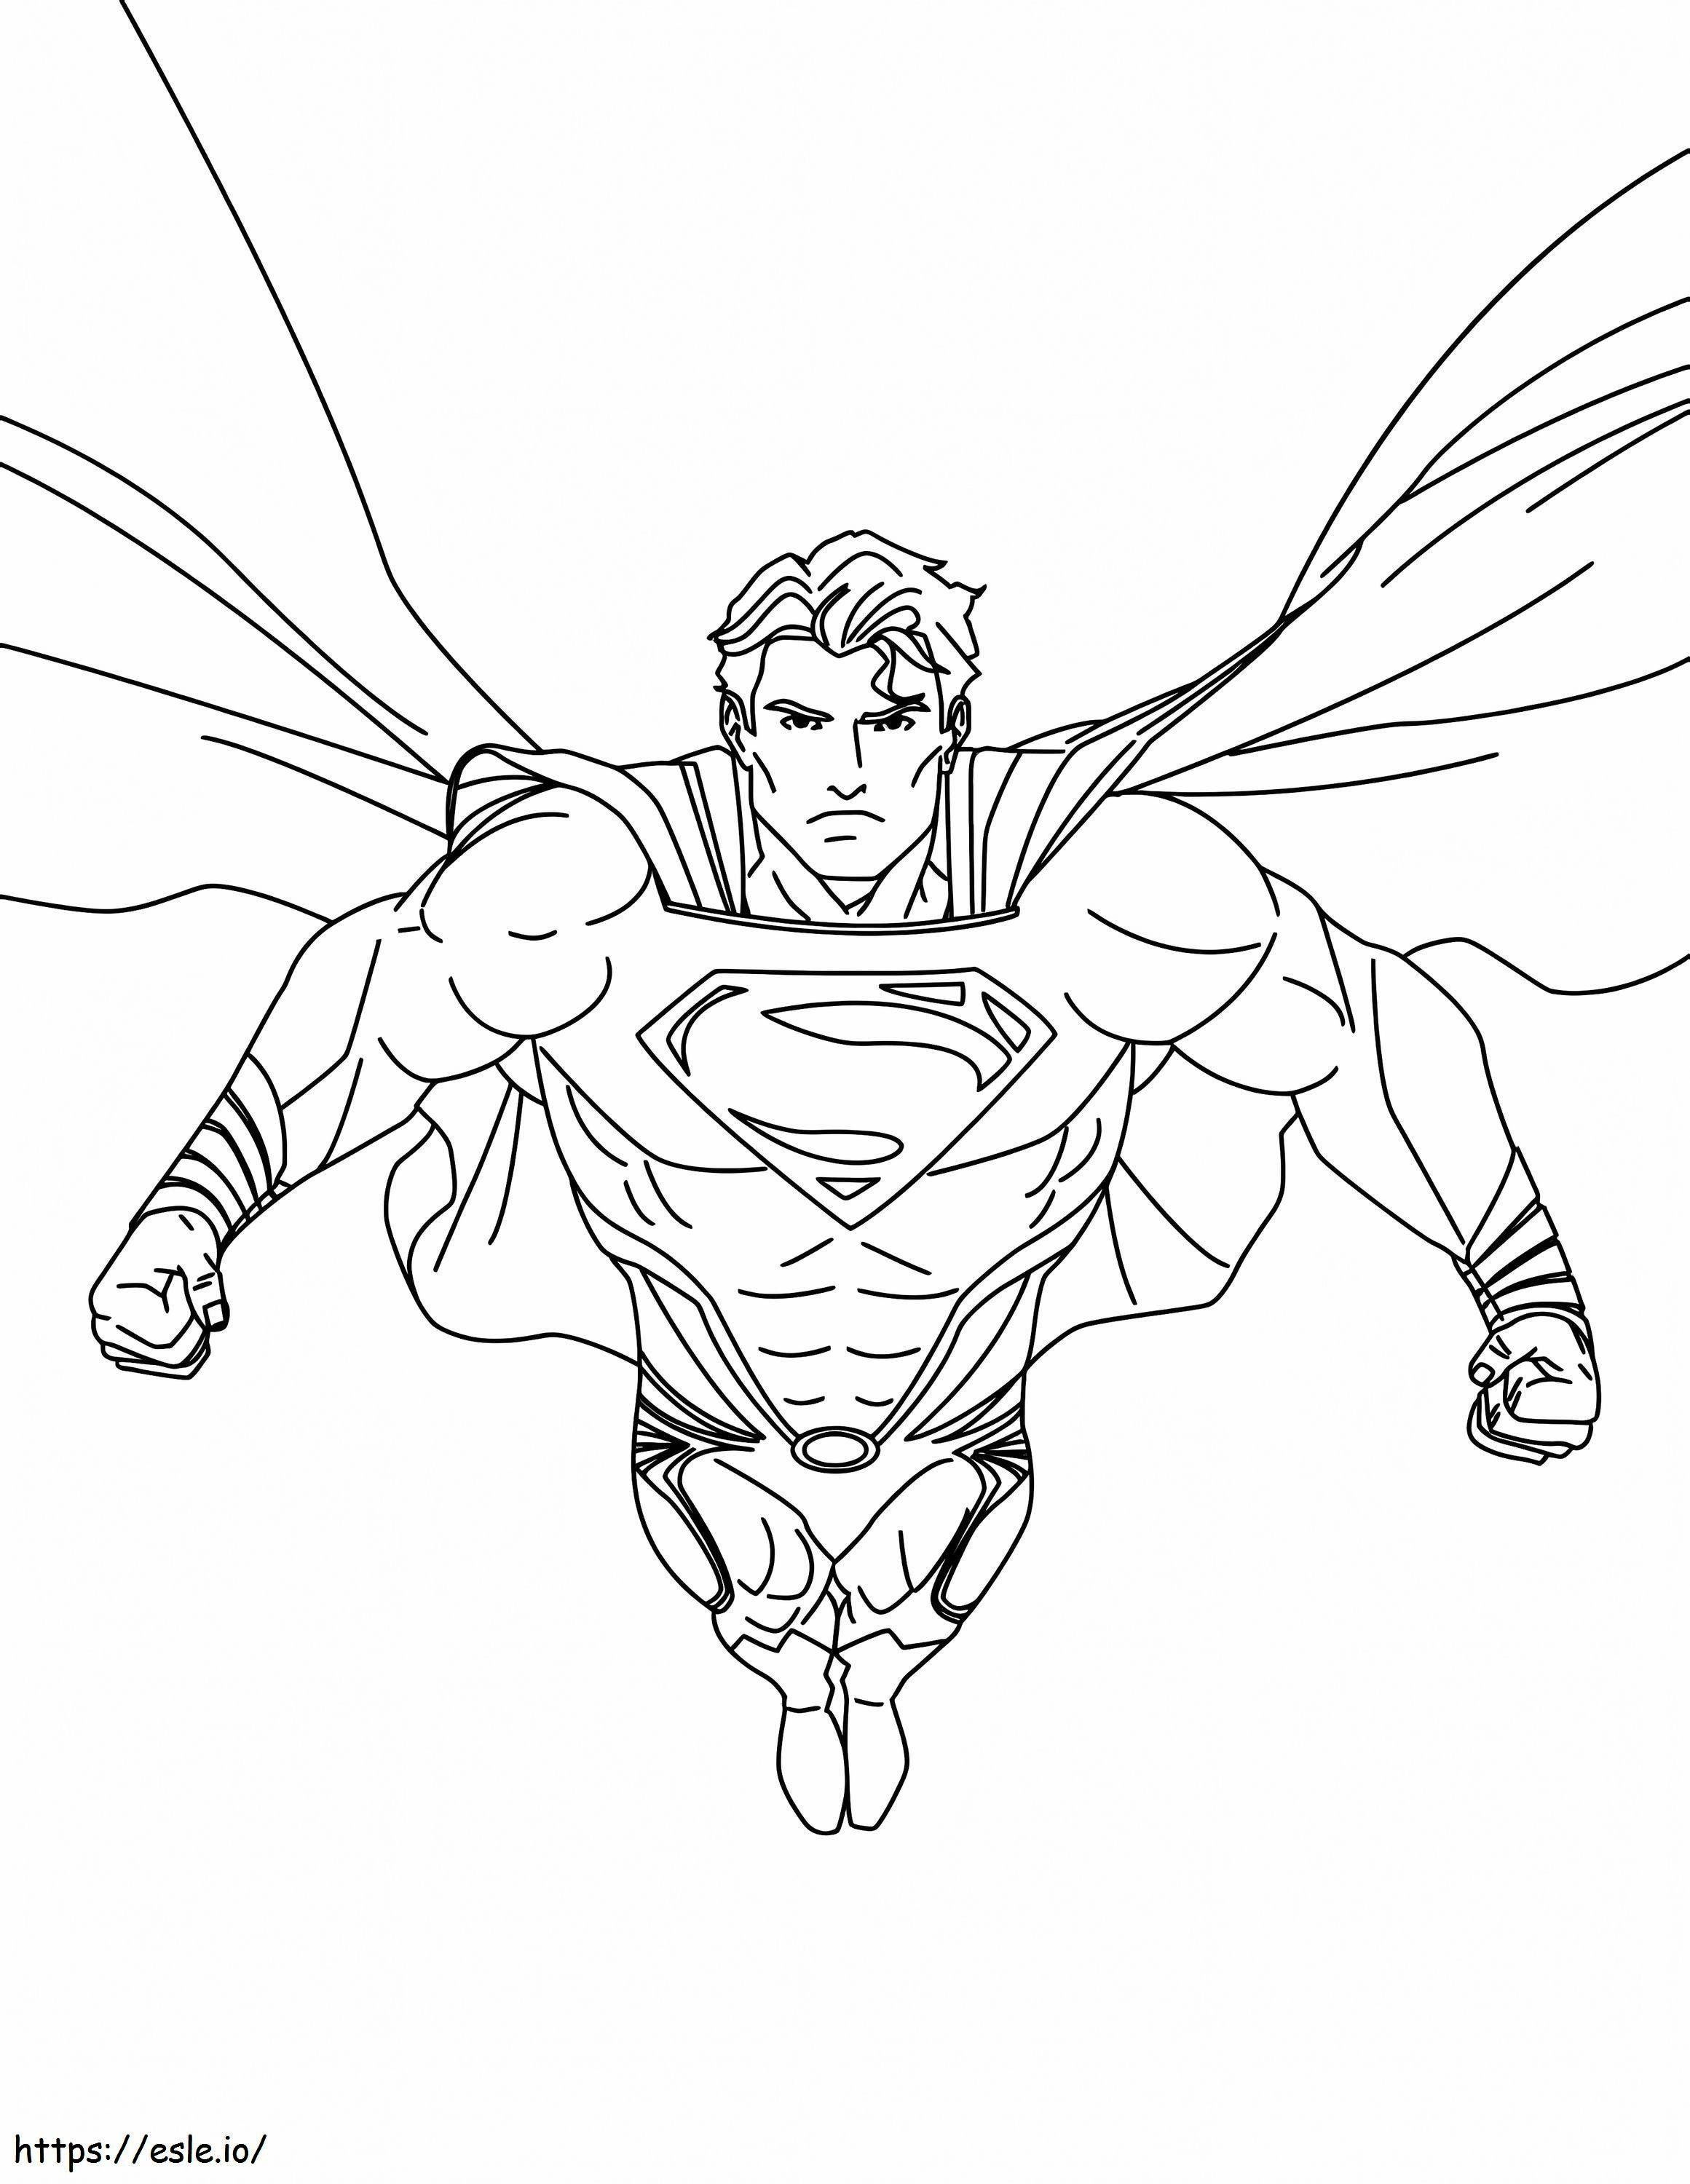 Perfect Superman coloring page